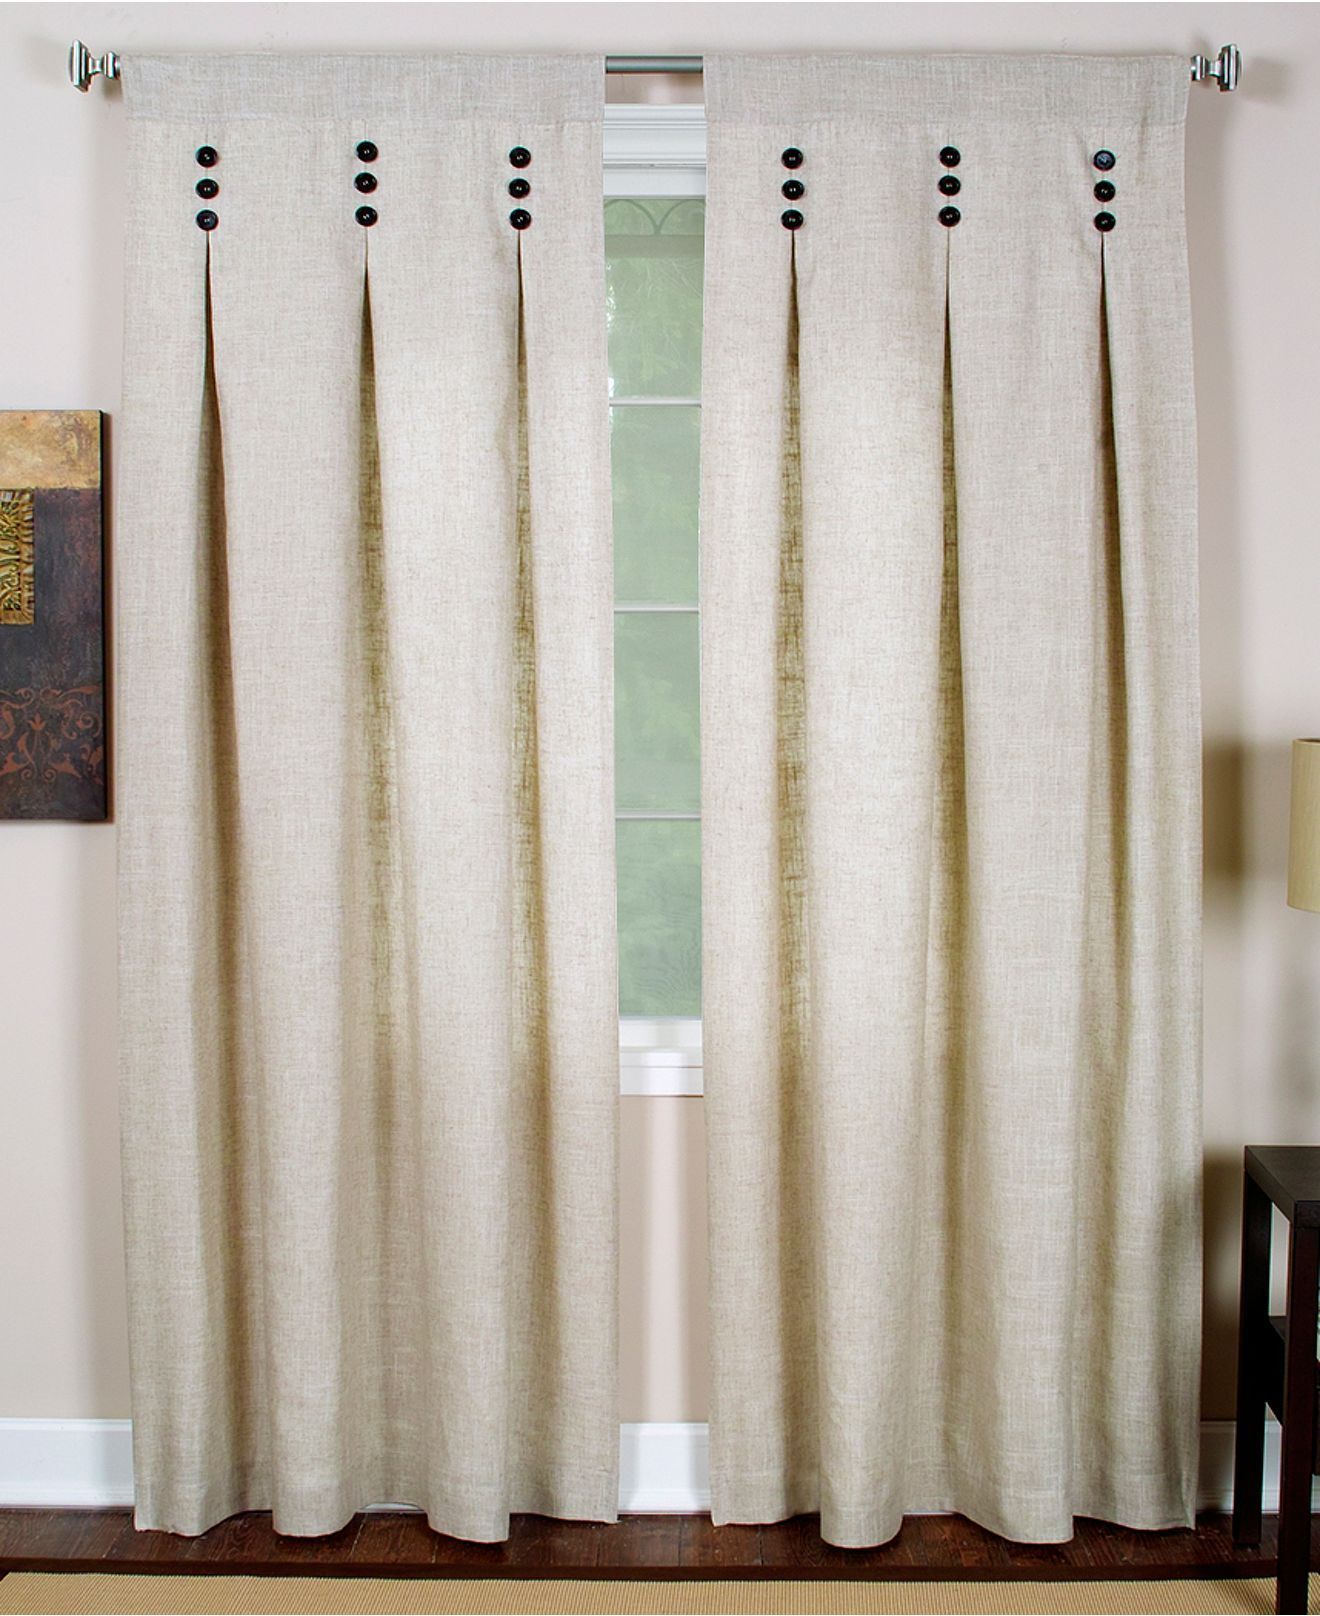 Inverted Box Pleat With Contrast Button Detail | Drape It Inside Linen Button Window Curtains Single Panel (View 9 of 20)